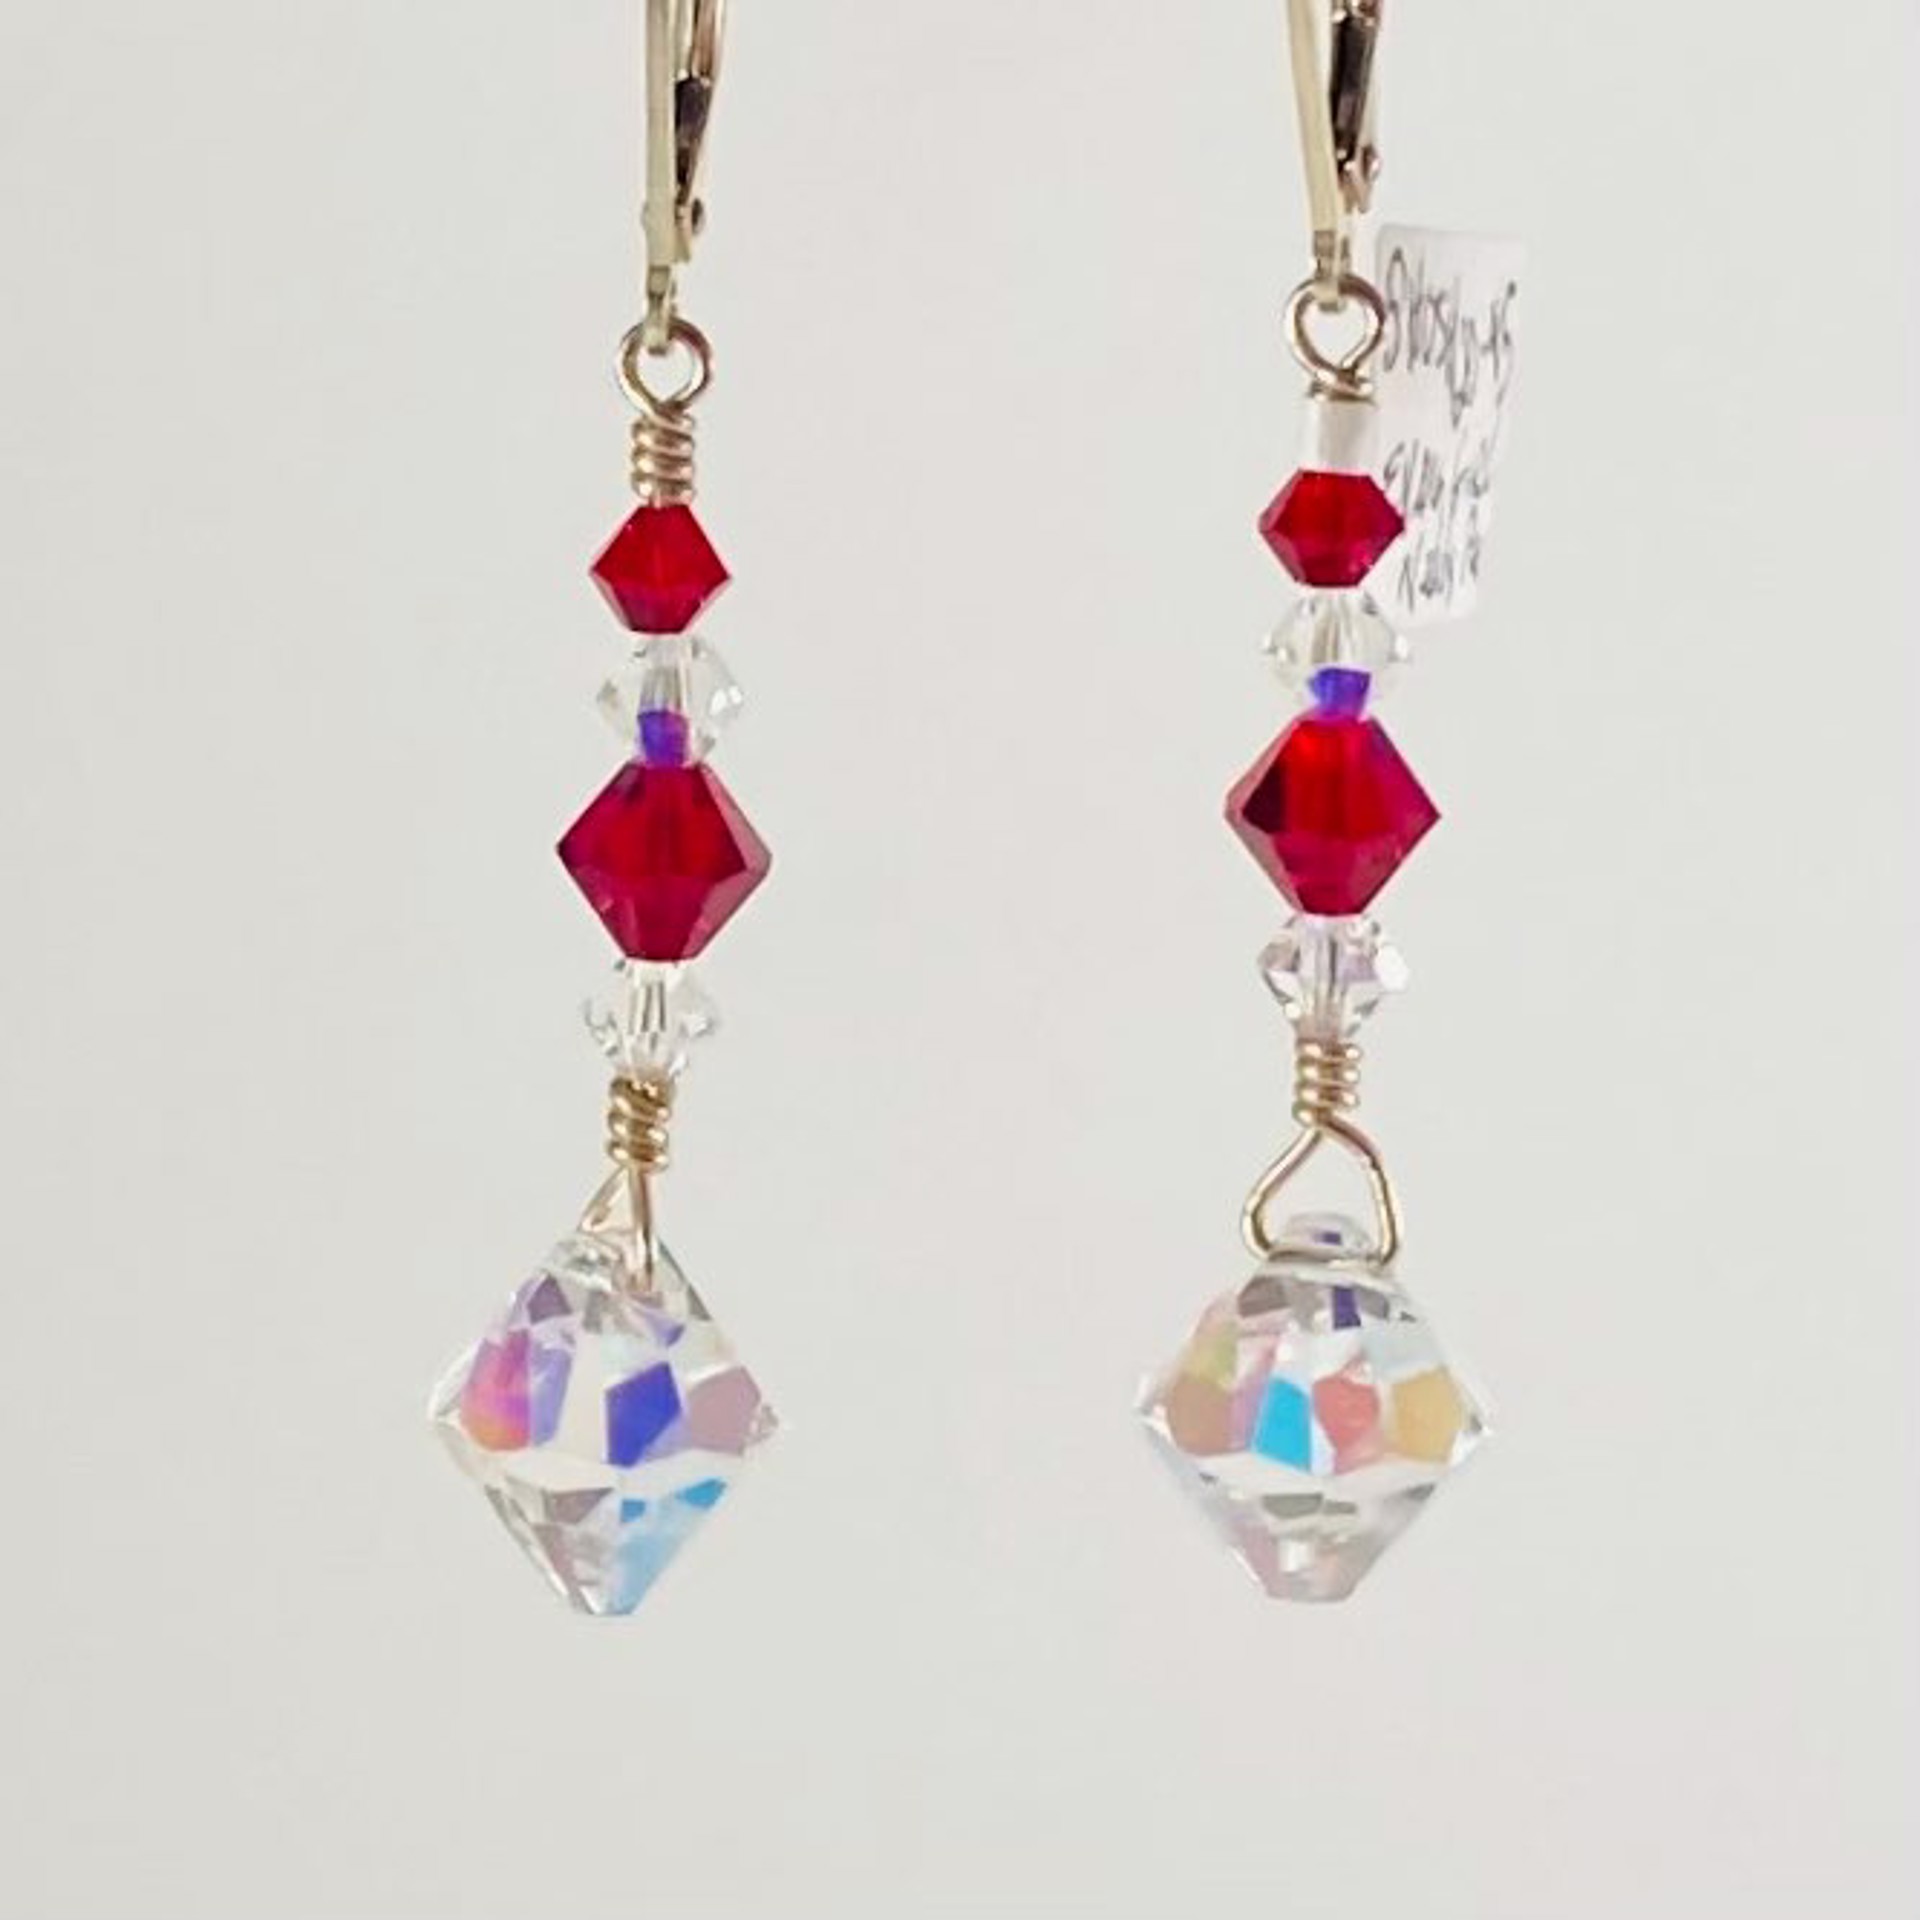 Every Girl Needs Red Earrings by Shoshannah Weinisch